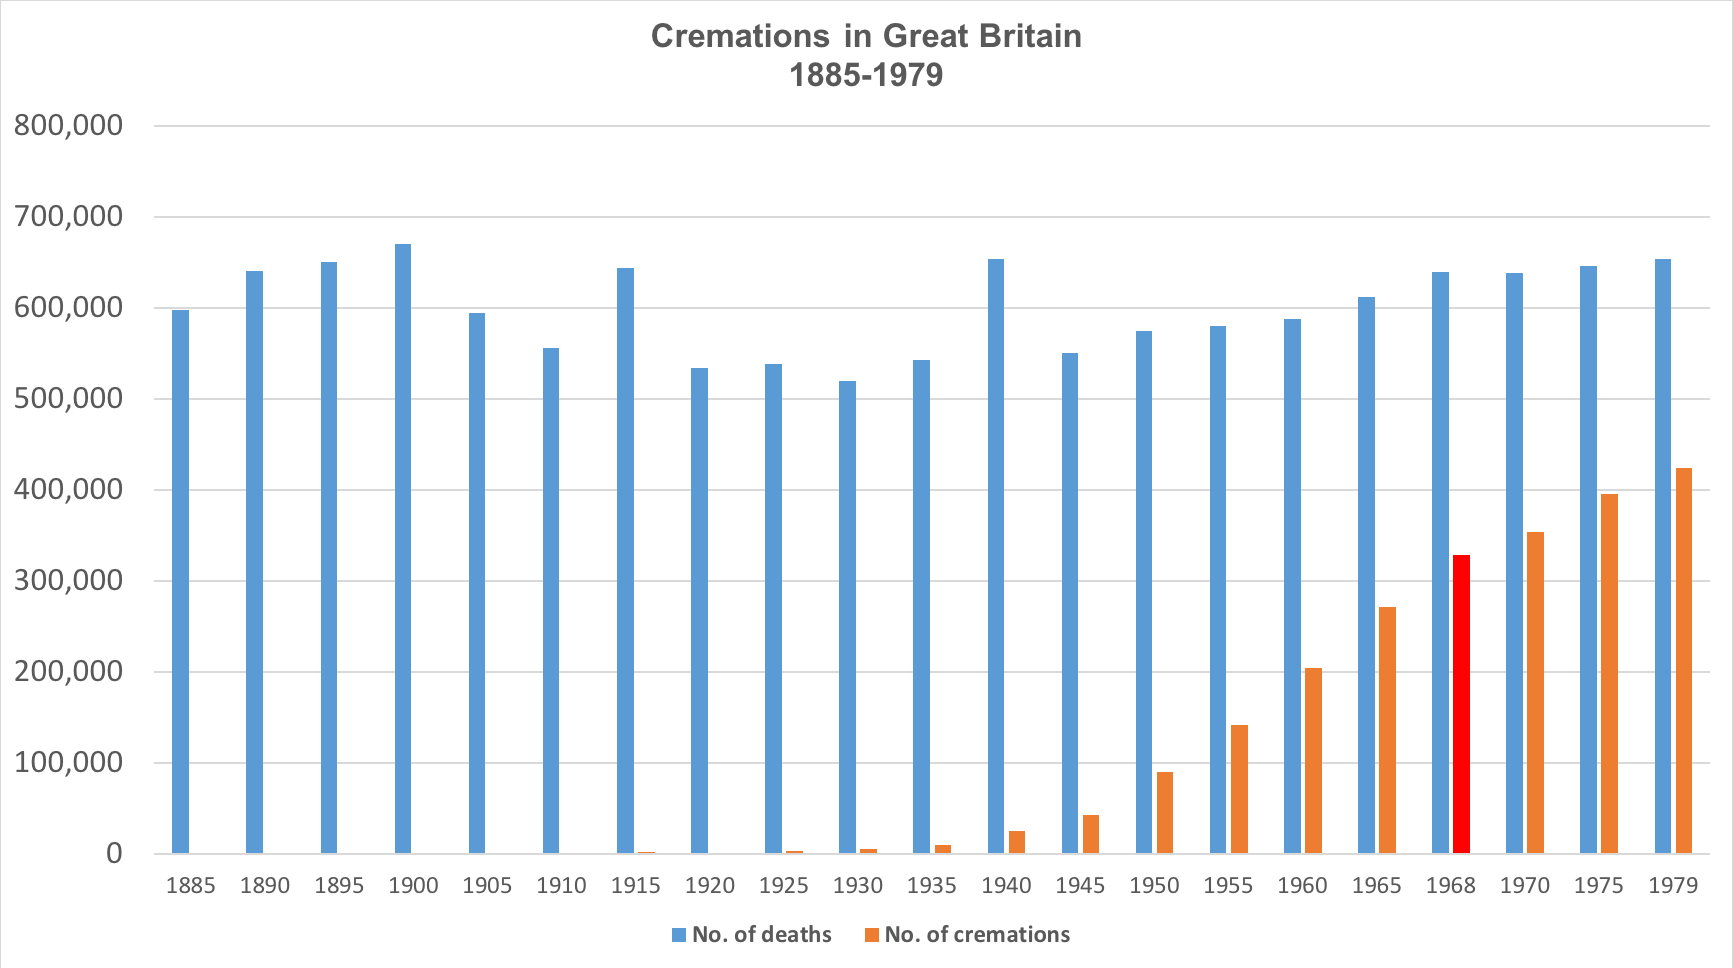 Chart showing burial vs cremation from 1885 to 1979. cremation rises in popularity from 1925 onwards, although the numbers of burials stay about the same.